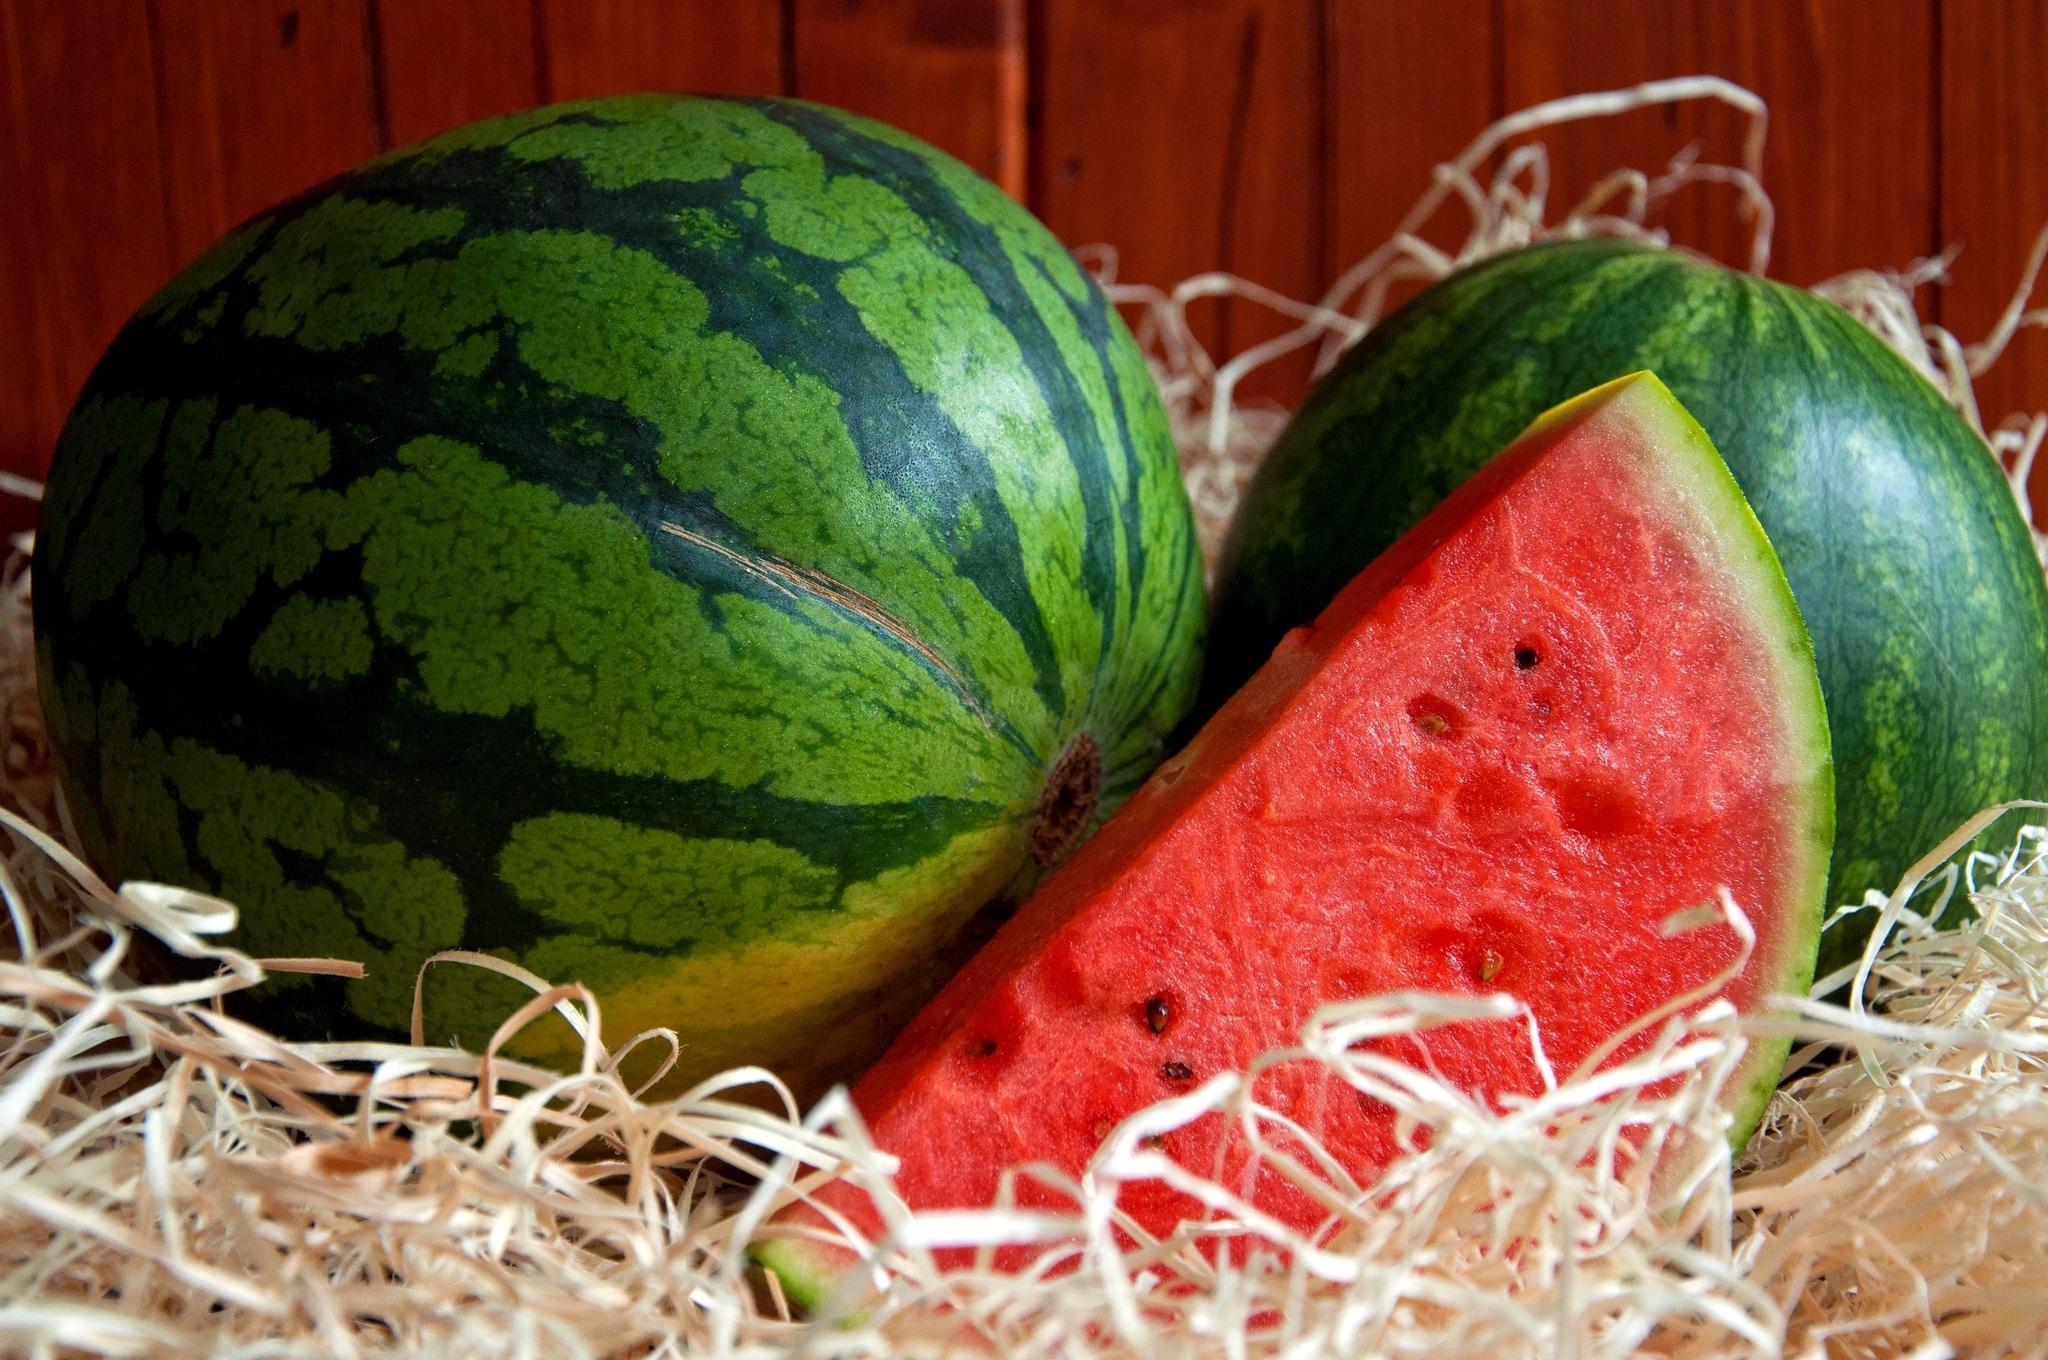 pictures of a watermelon